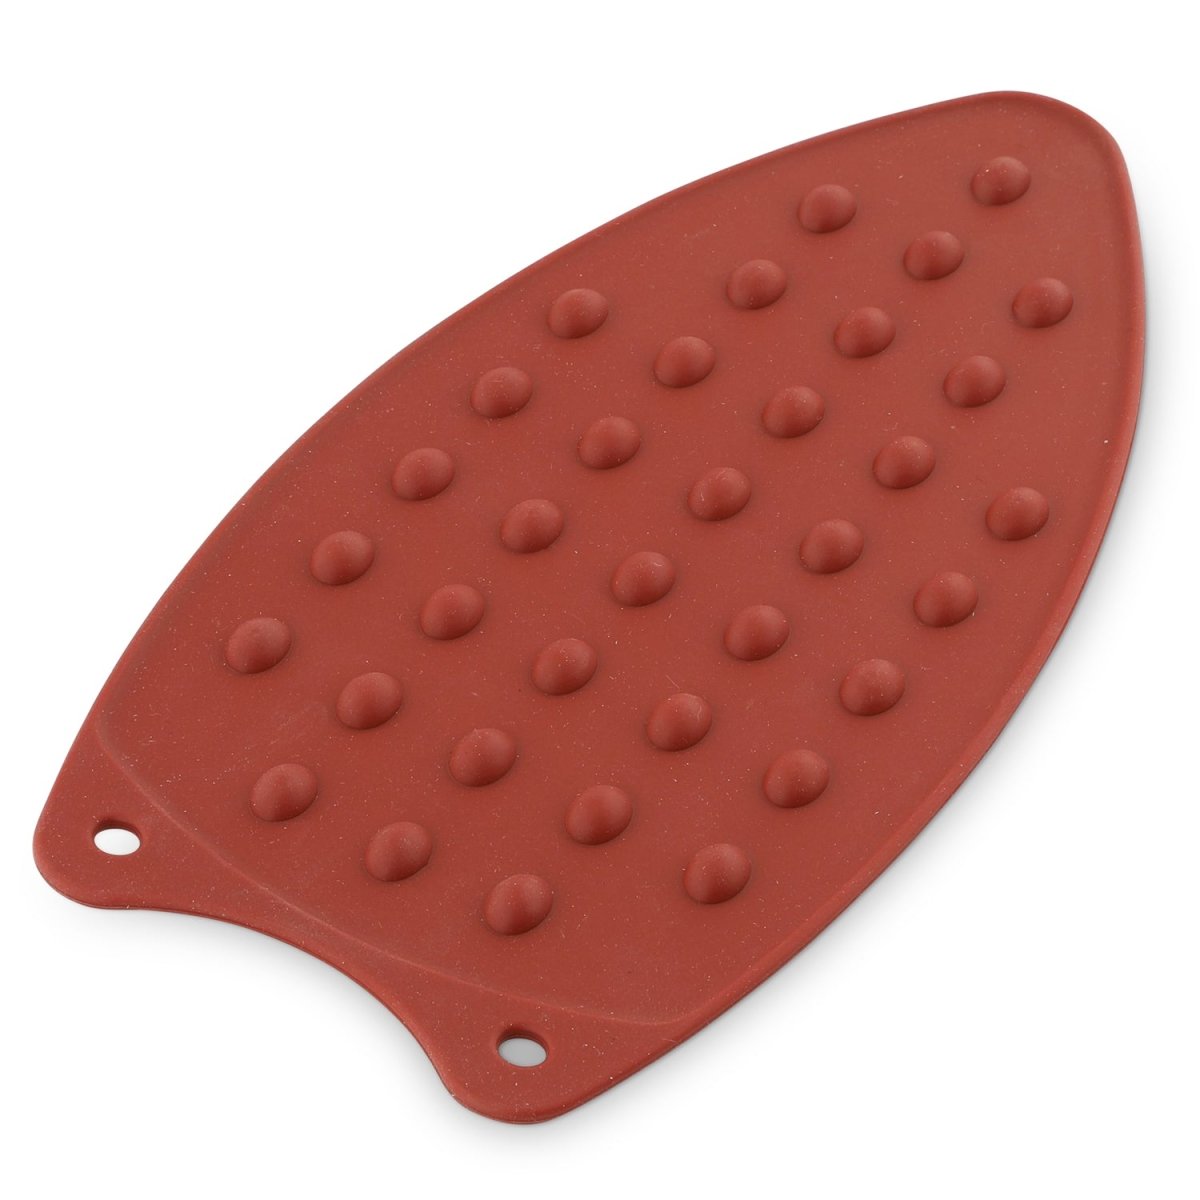 Silicone Iron Stand Mat Rest Ironing Pad Helper Board Heat Resistant Deck  Tool H